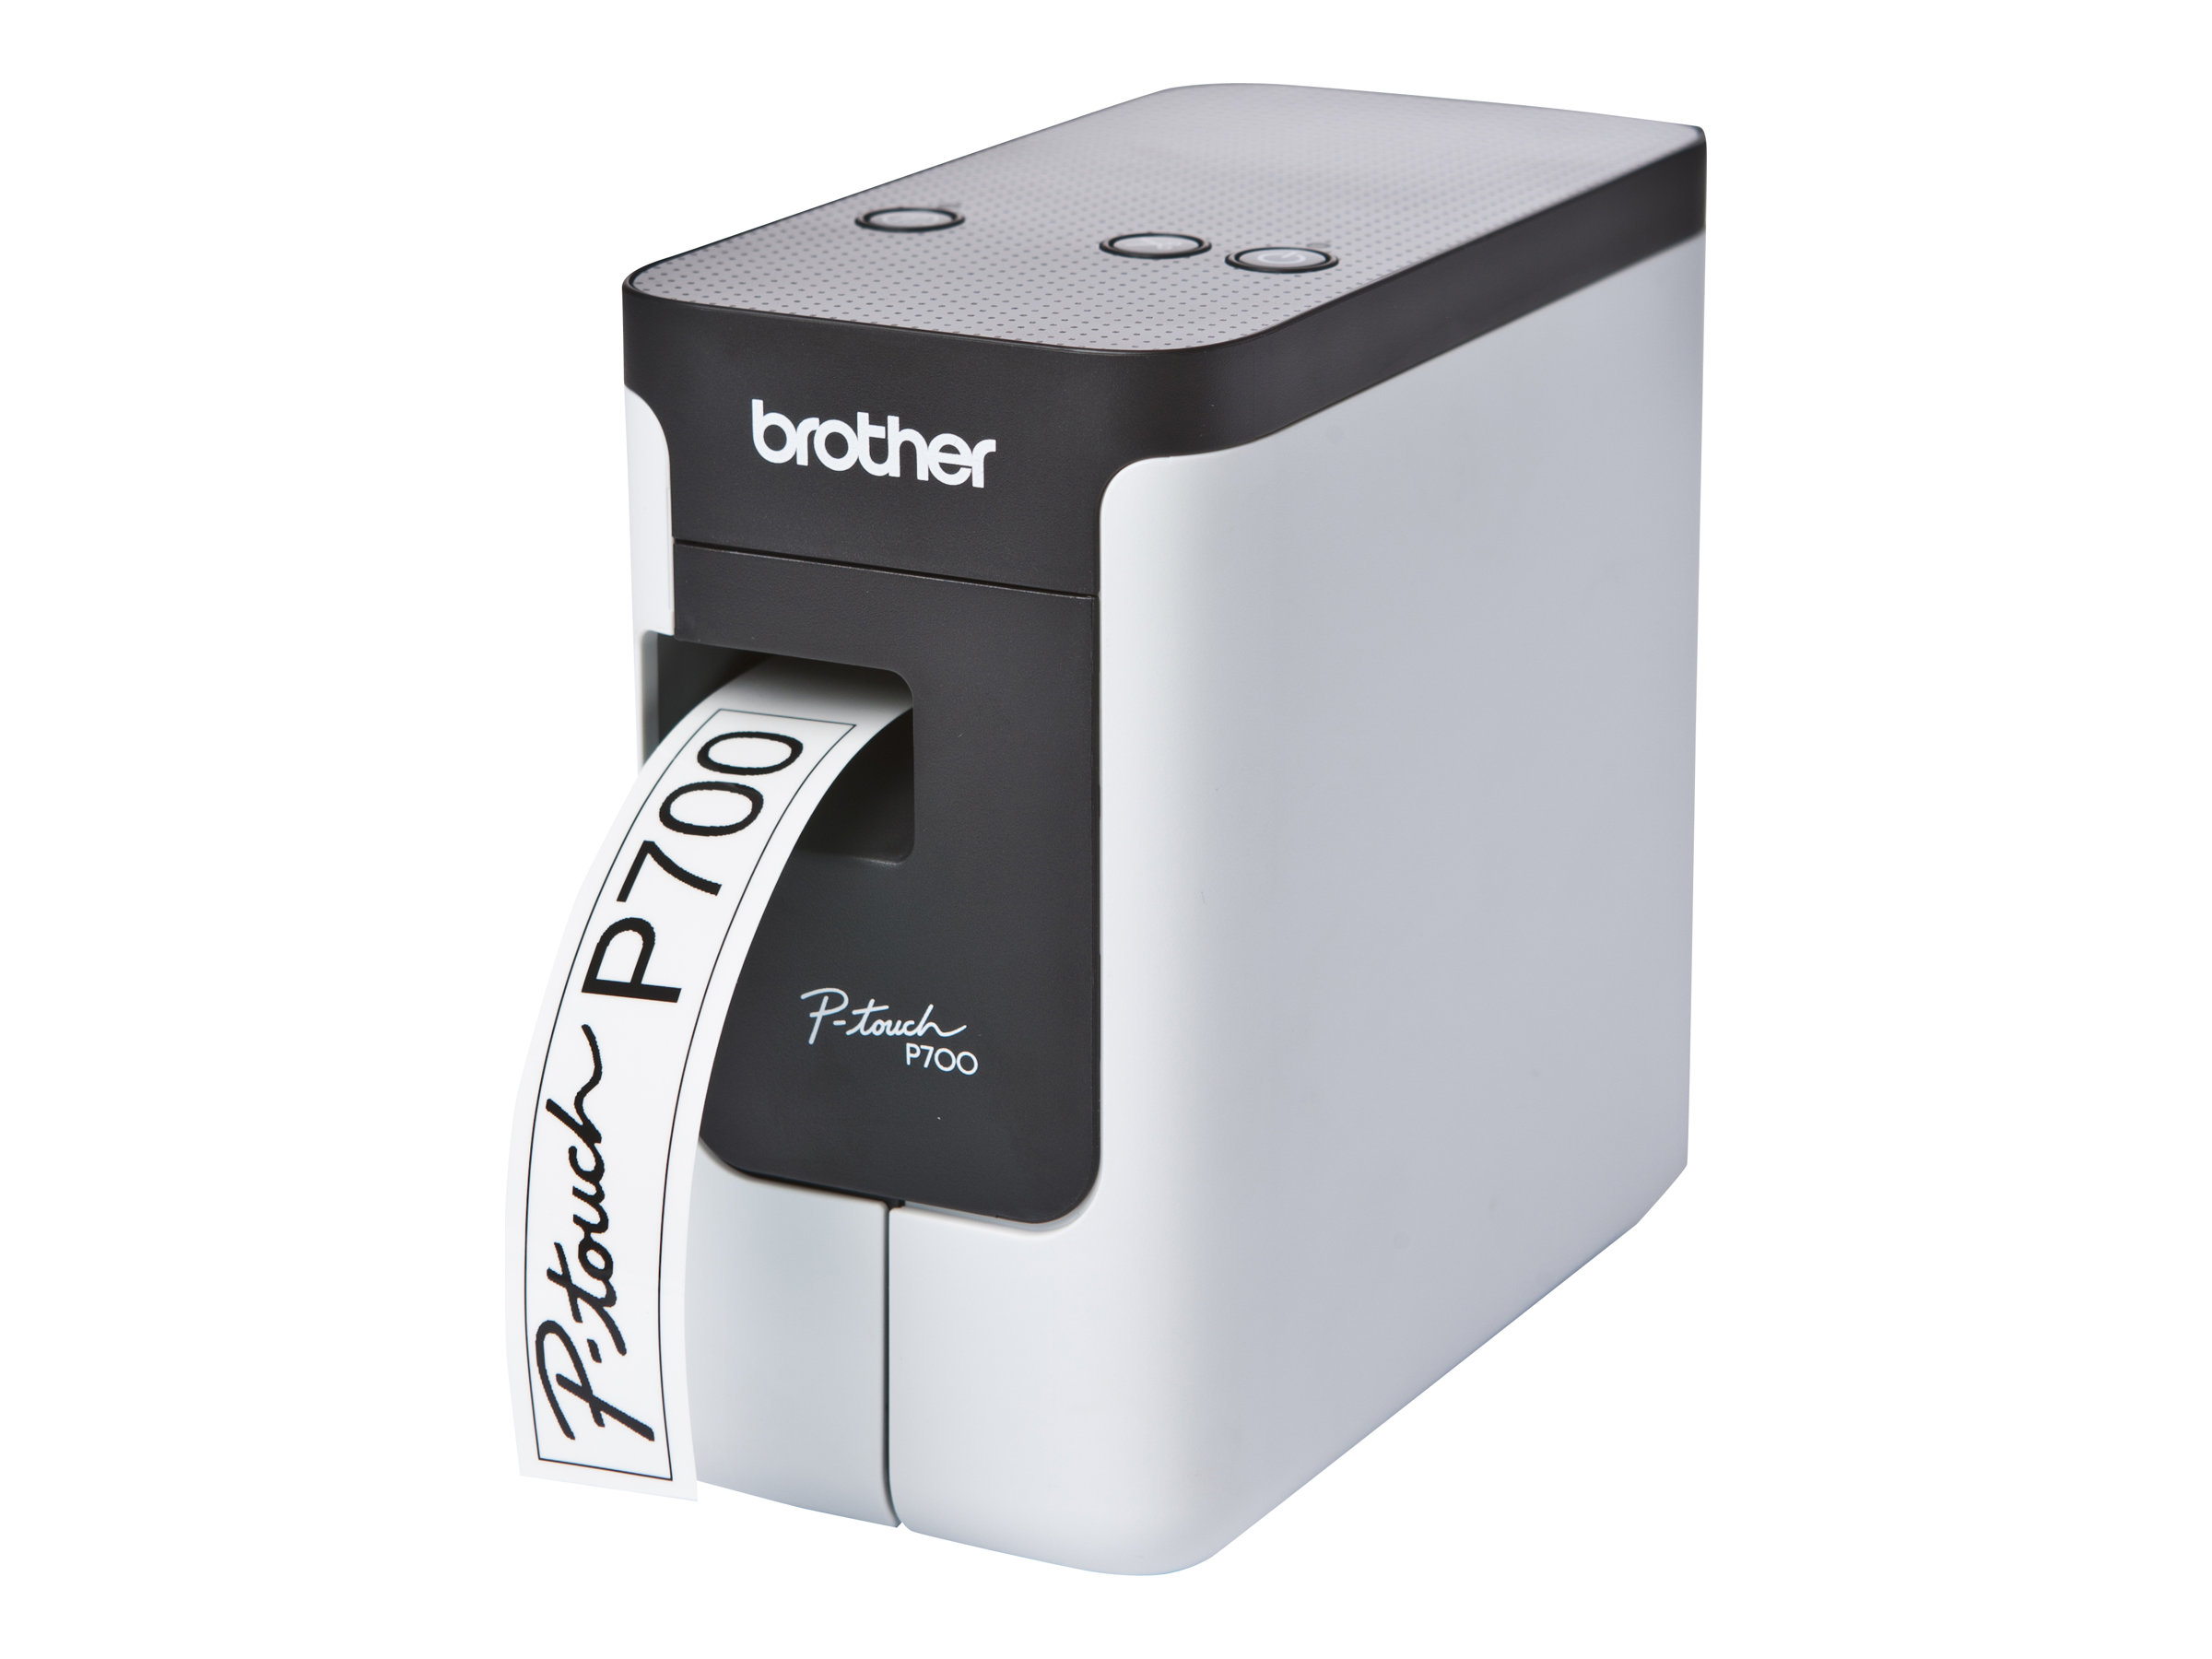 Brother P-Touch PT-P700 - Etikettendrucker - Thermotransfer - Rolle (2,4 cm)